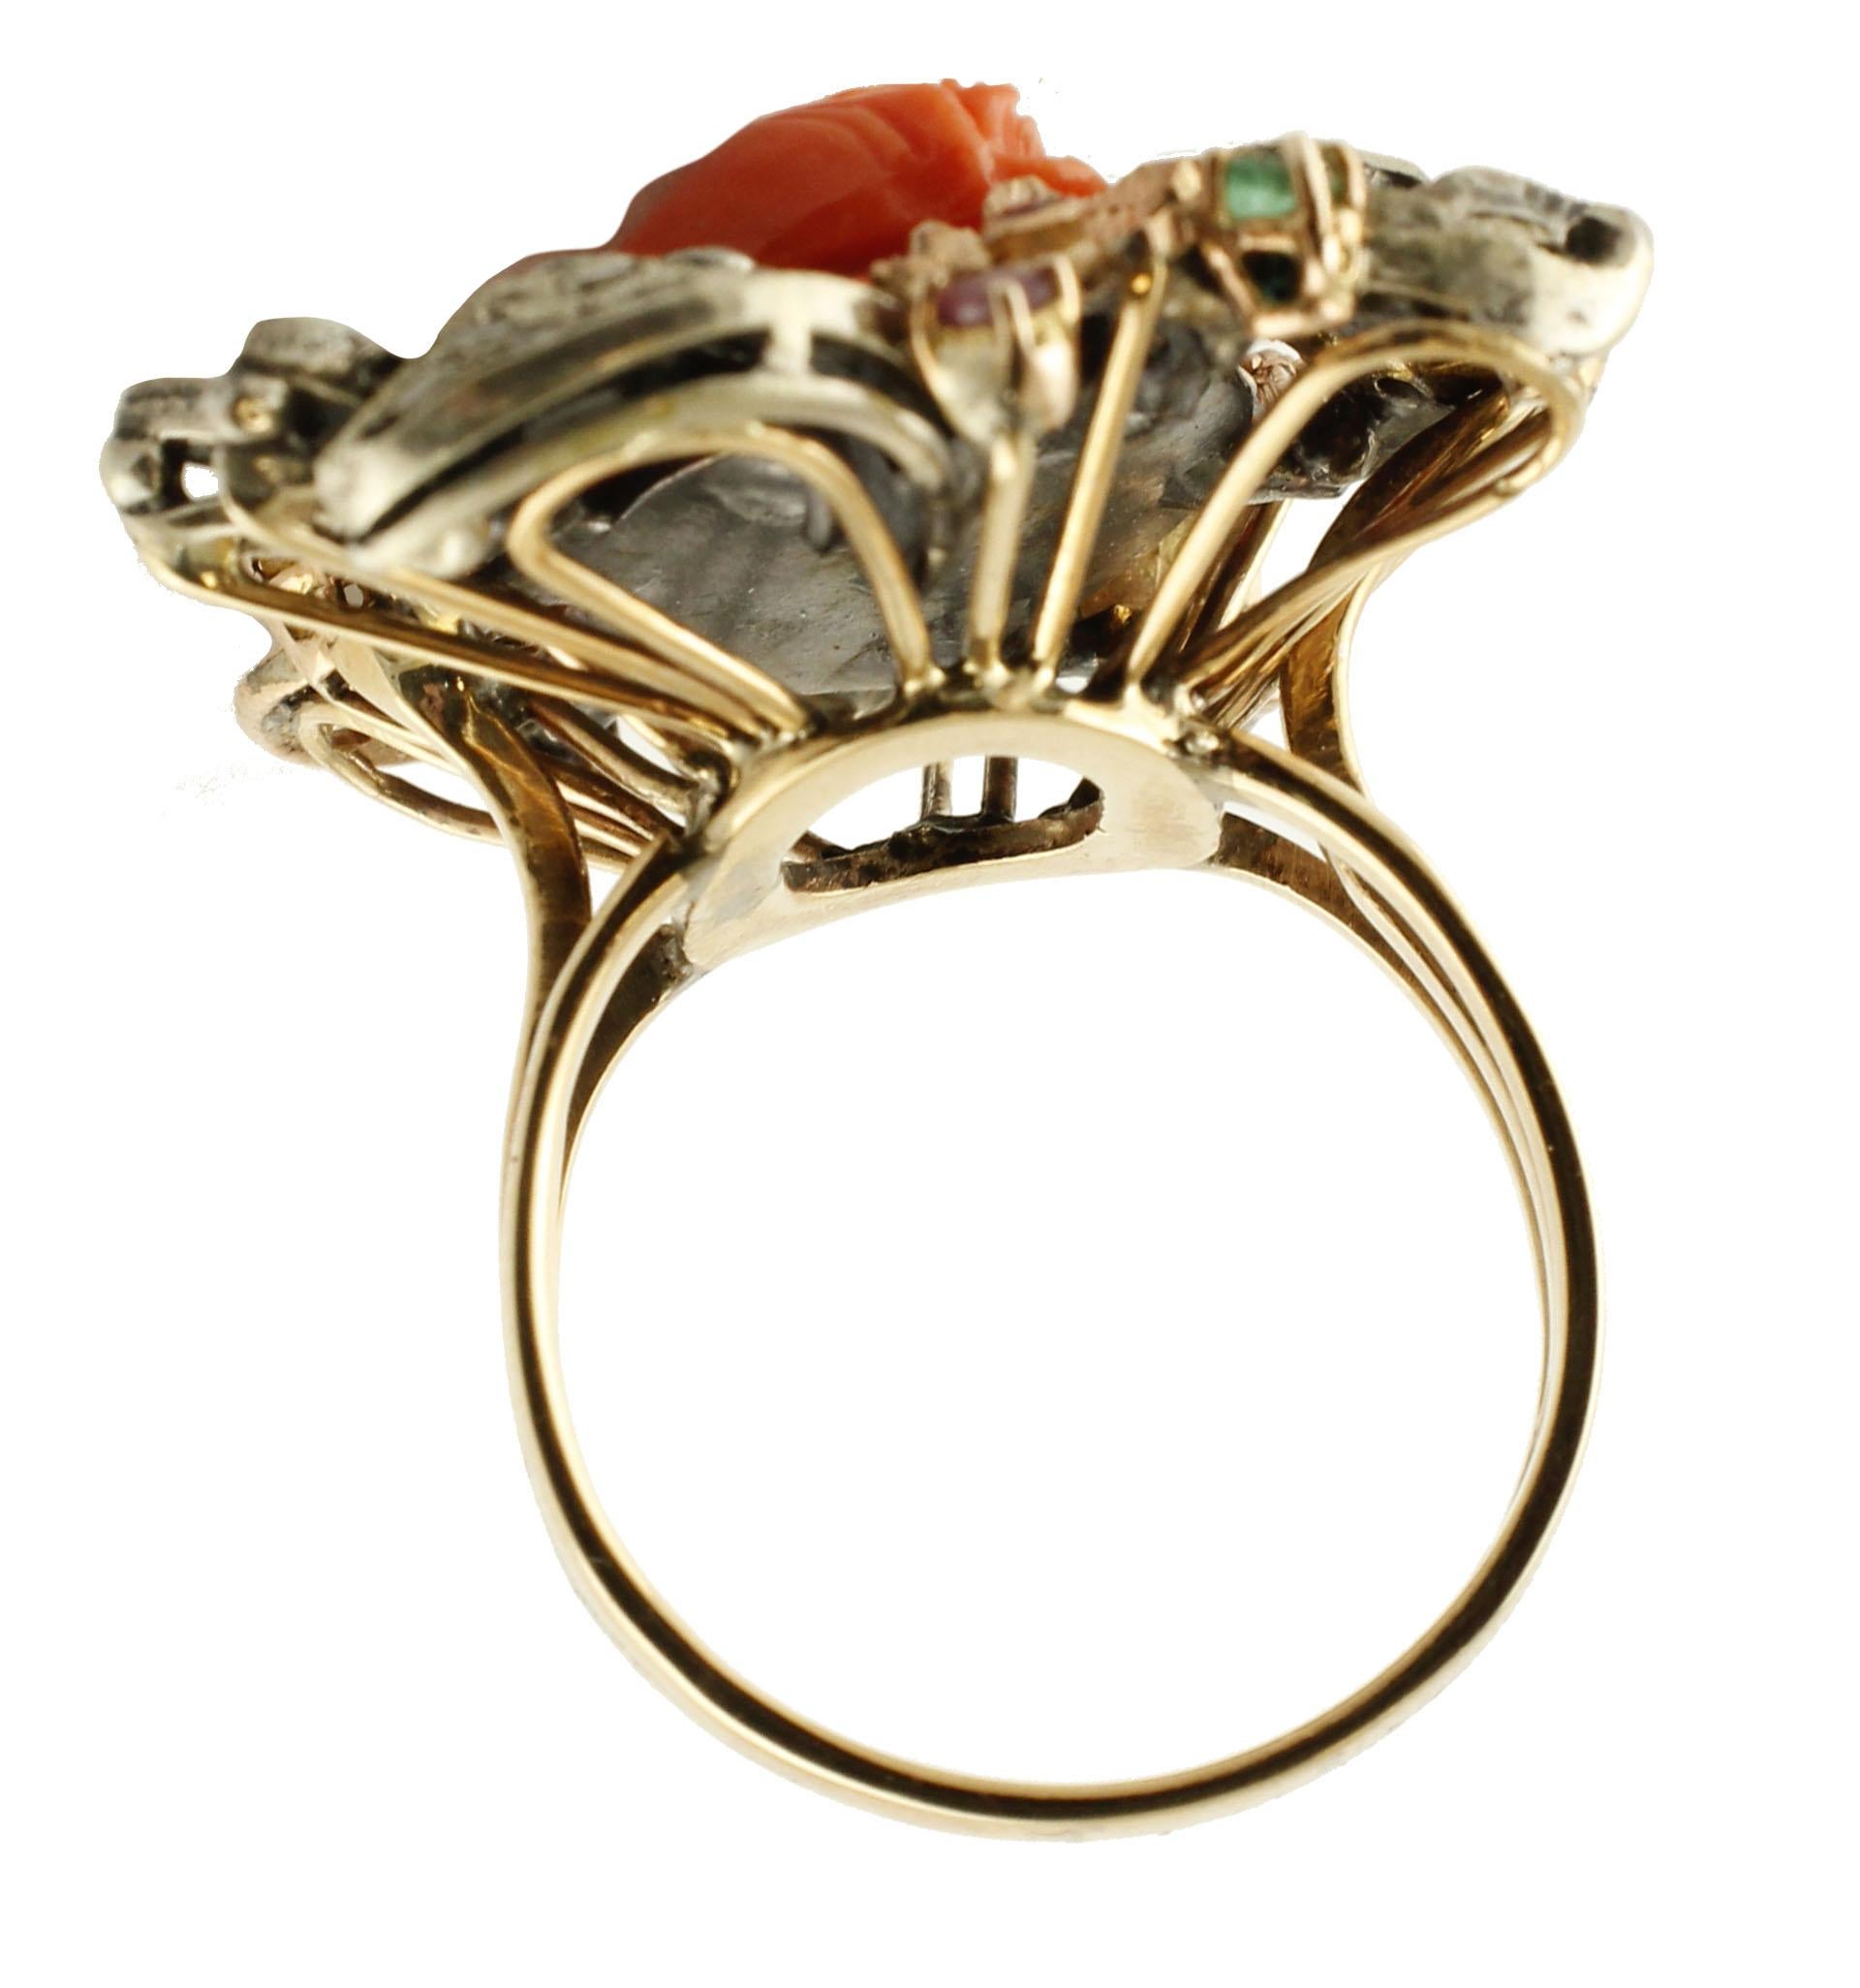 Mixed Cut Diamonds, Rubies, Emeralds, Sapphires, Coral Rose Gold and Silver Retrò Ring For Sale